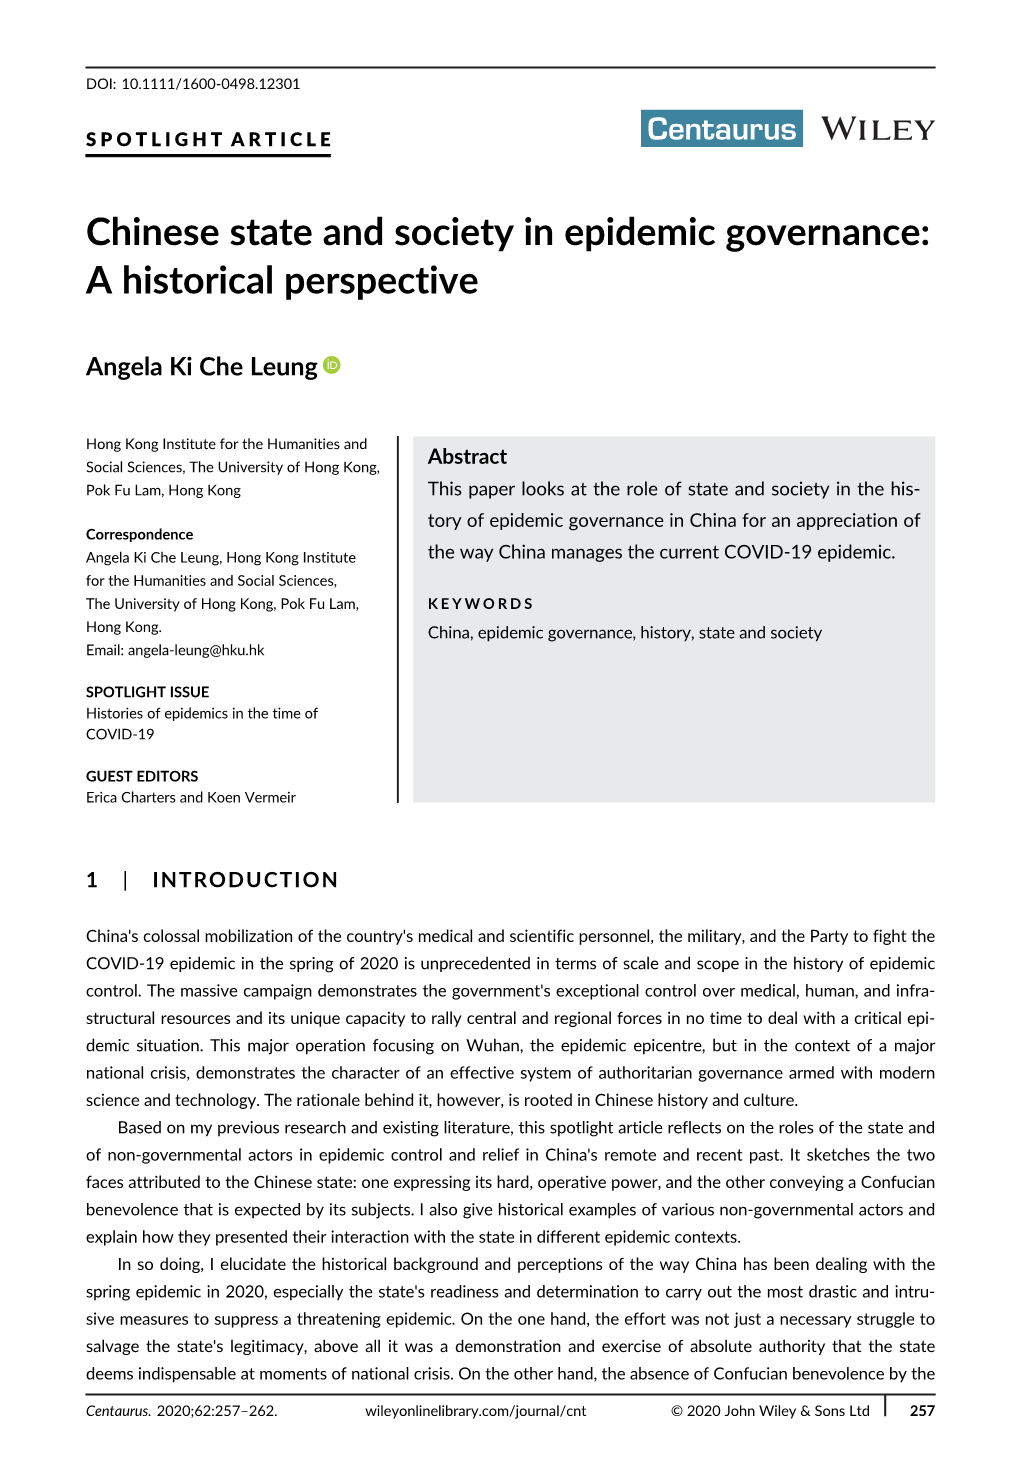 Chinese State and Society in Epidemic Governance: a Historical Perspective